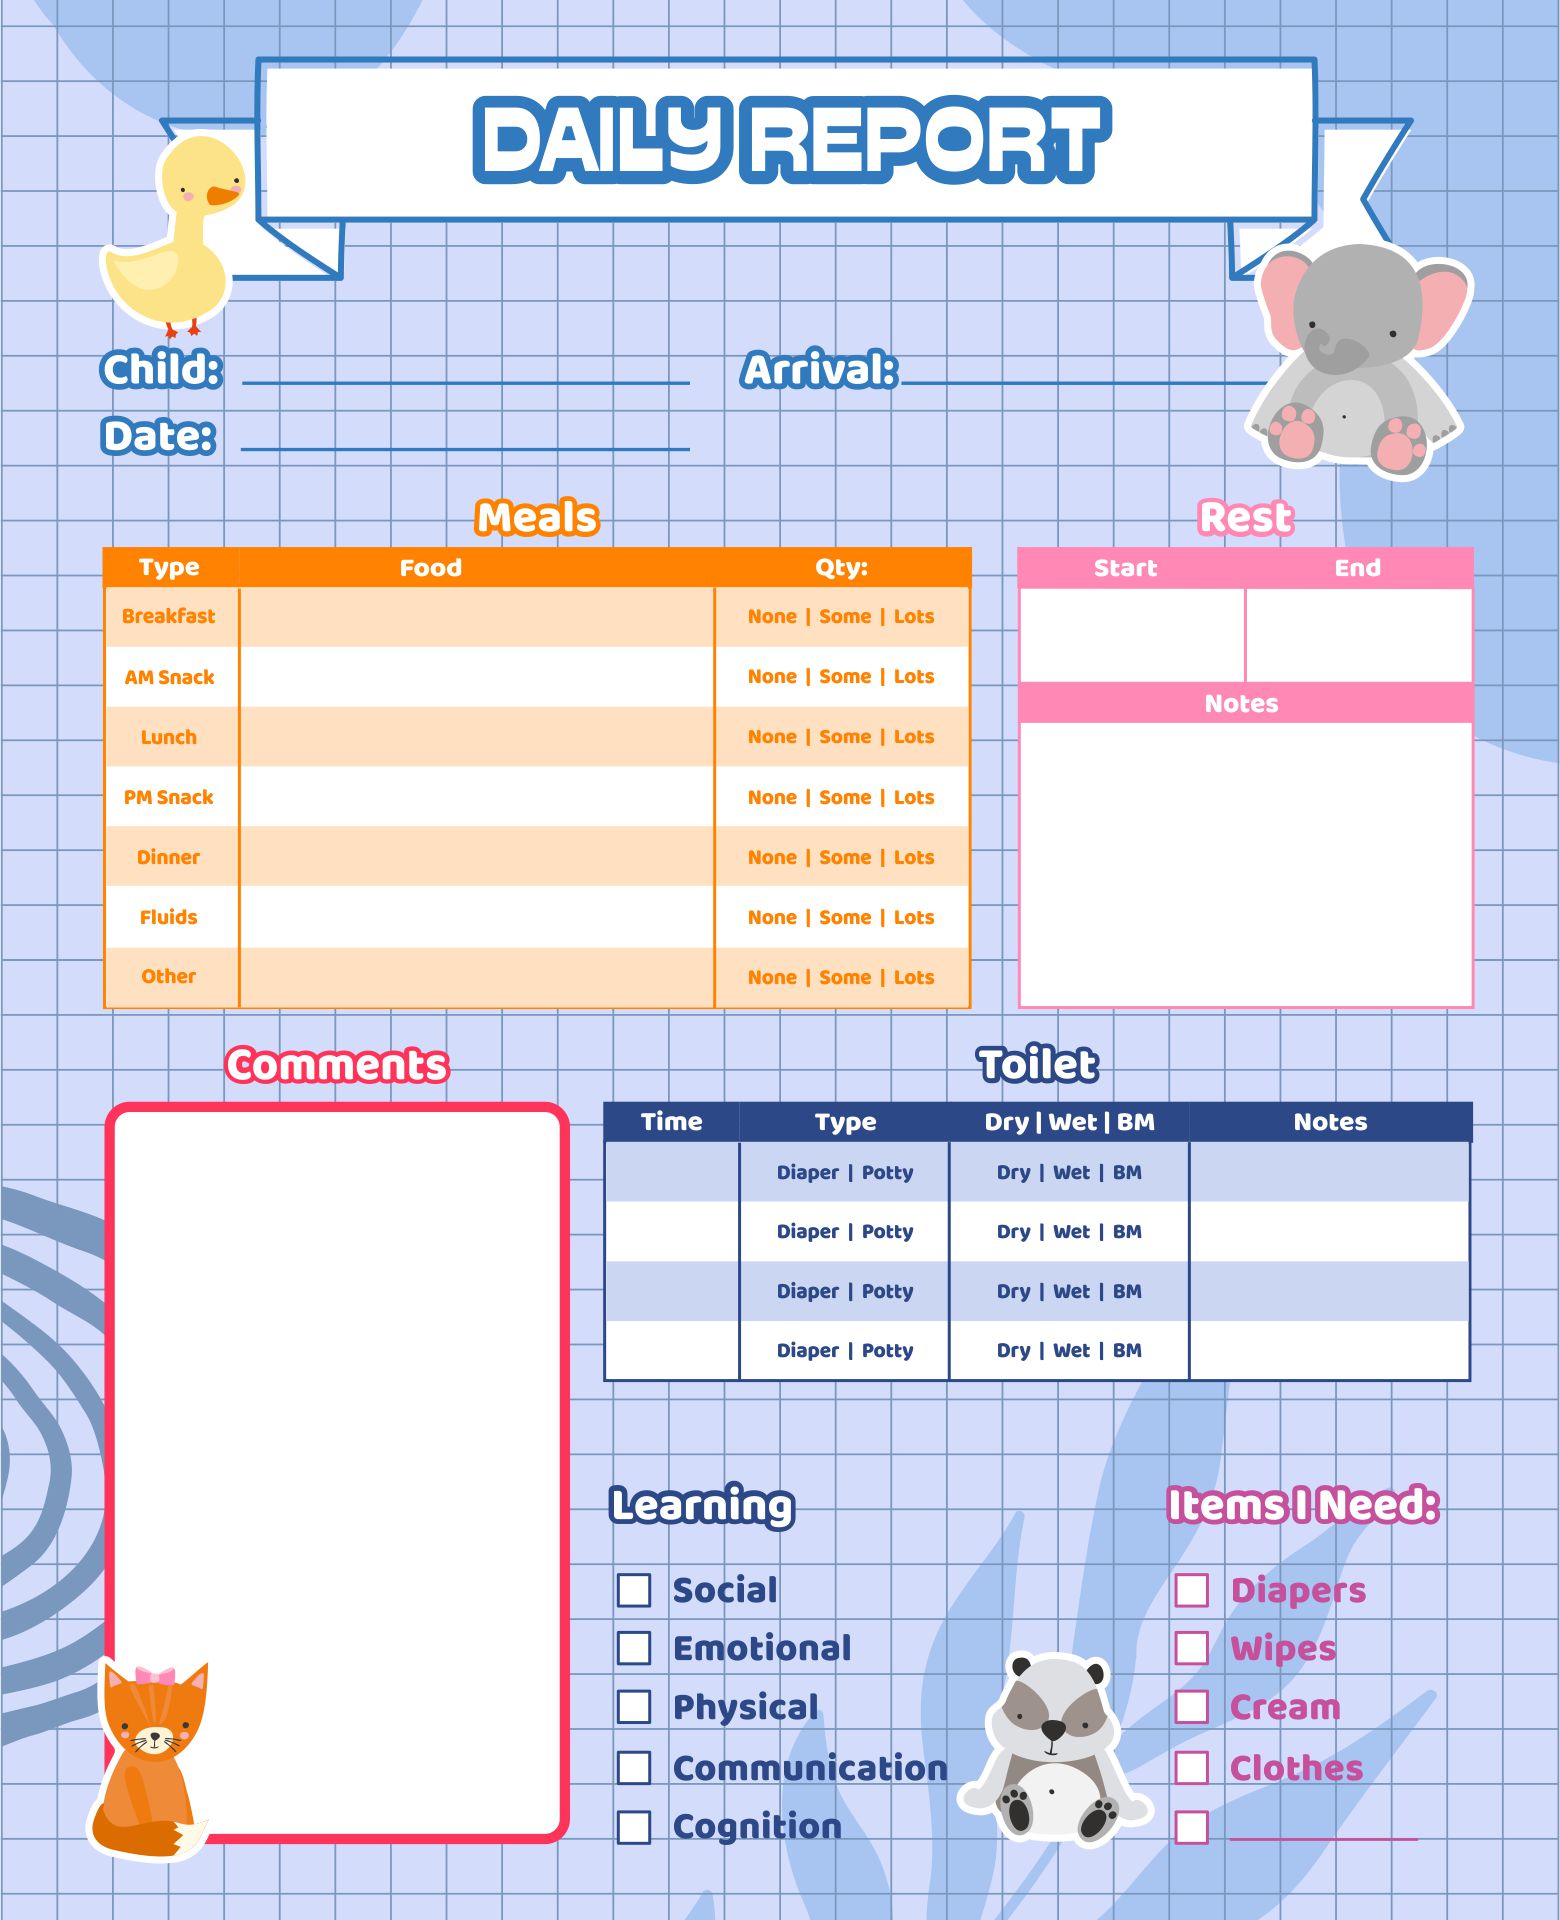 Day Care Infant Daily Report Sheets